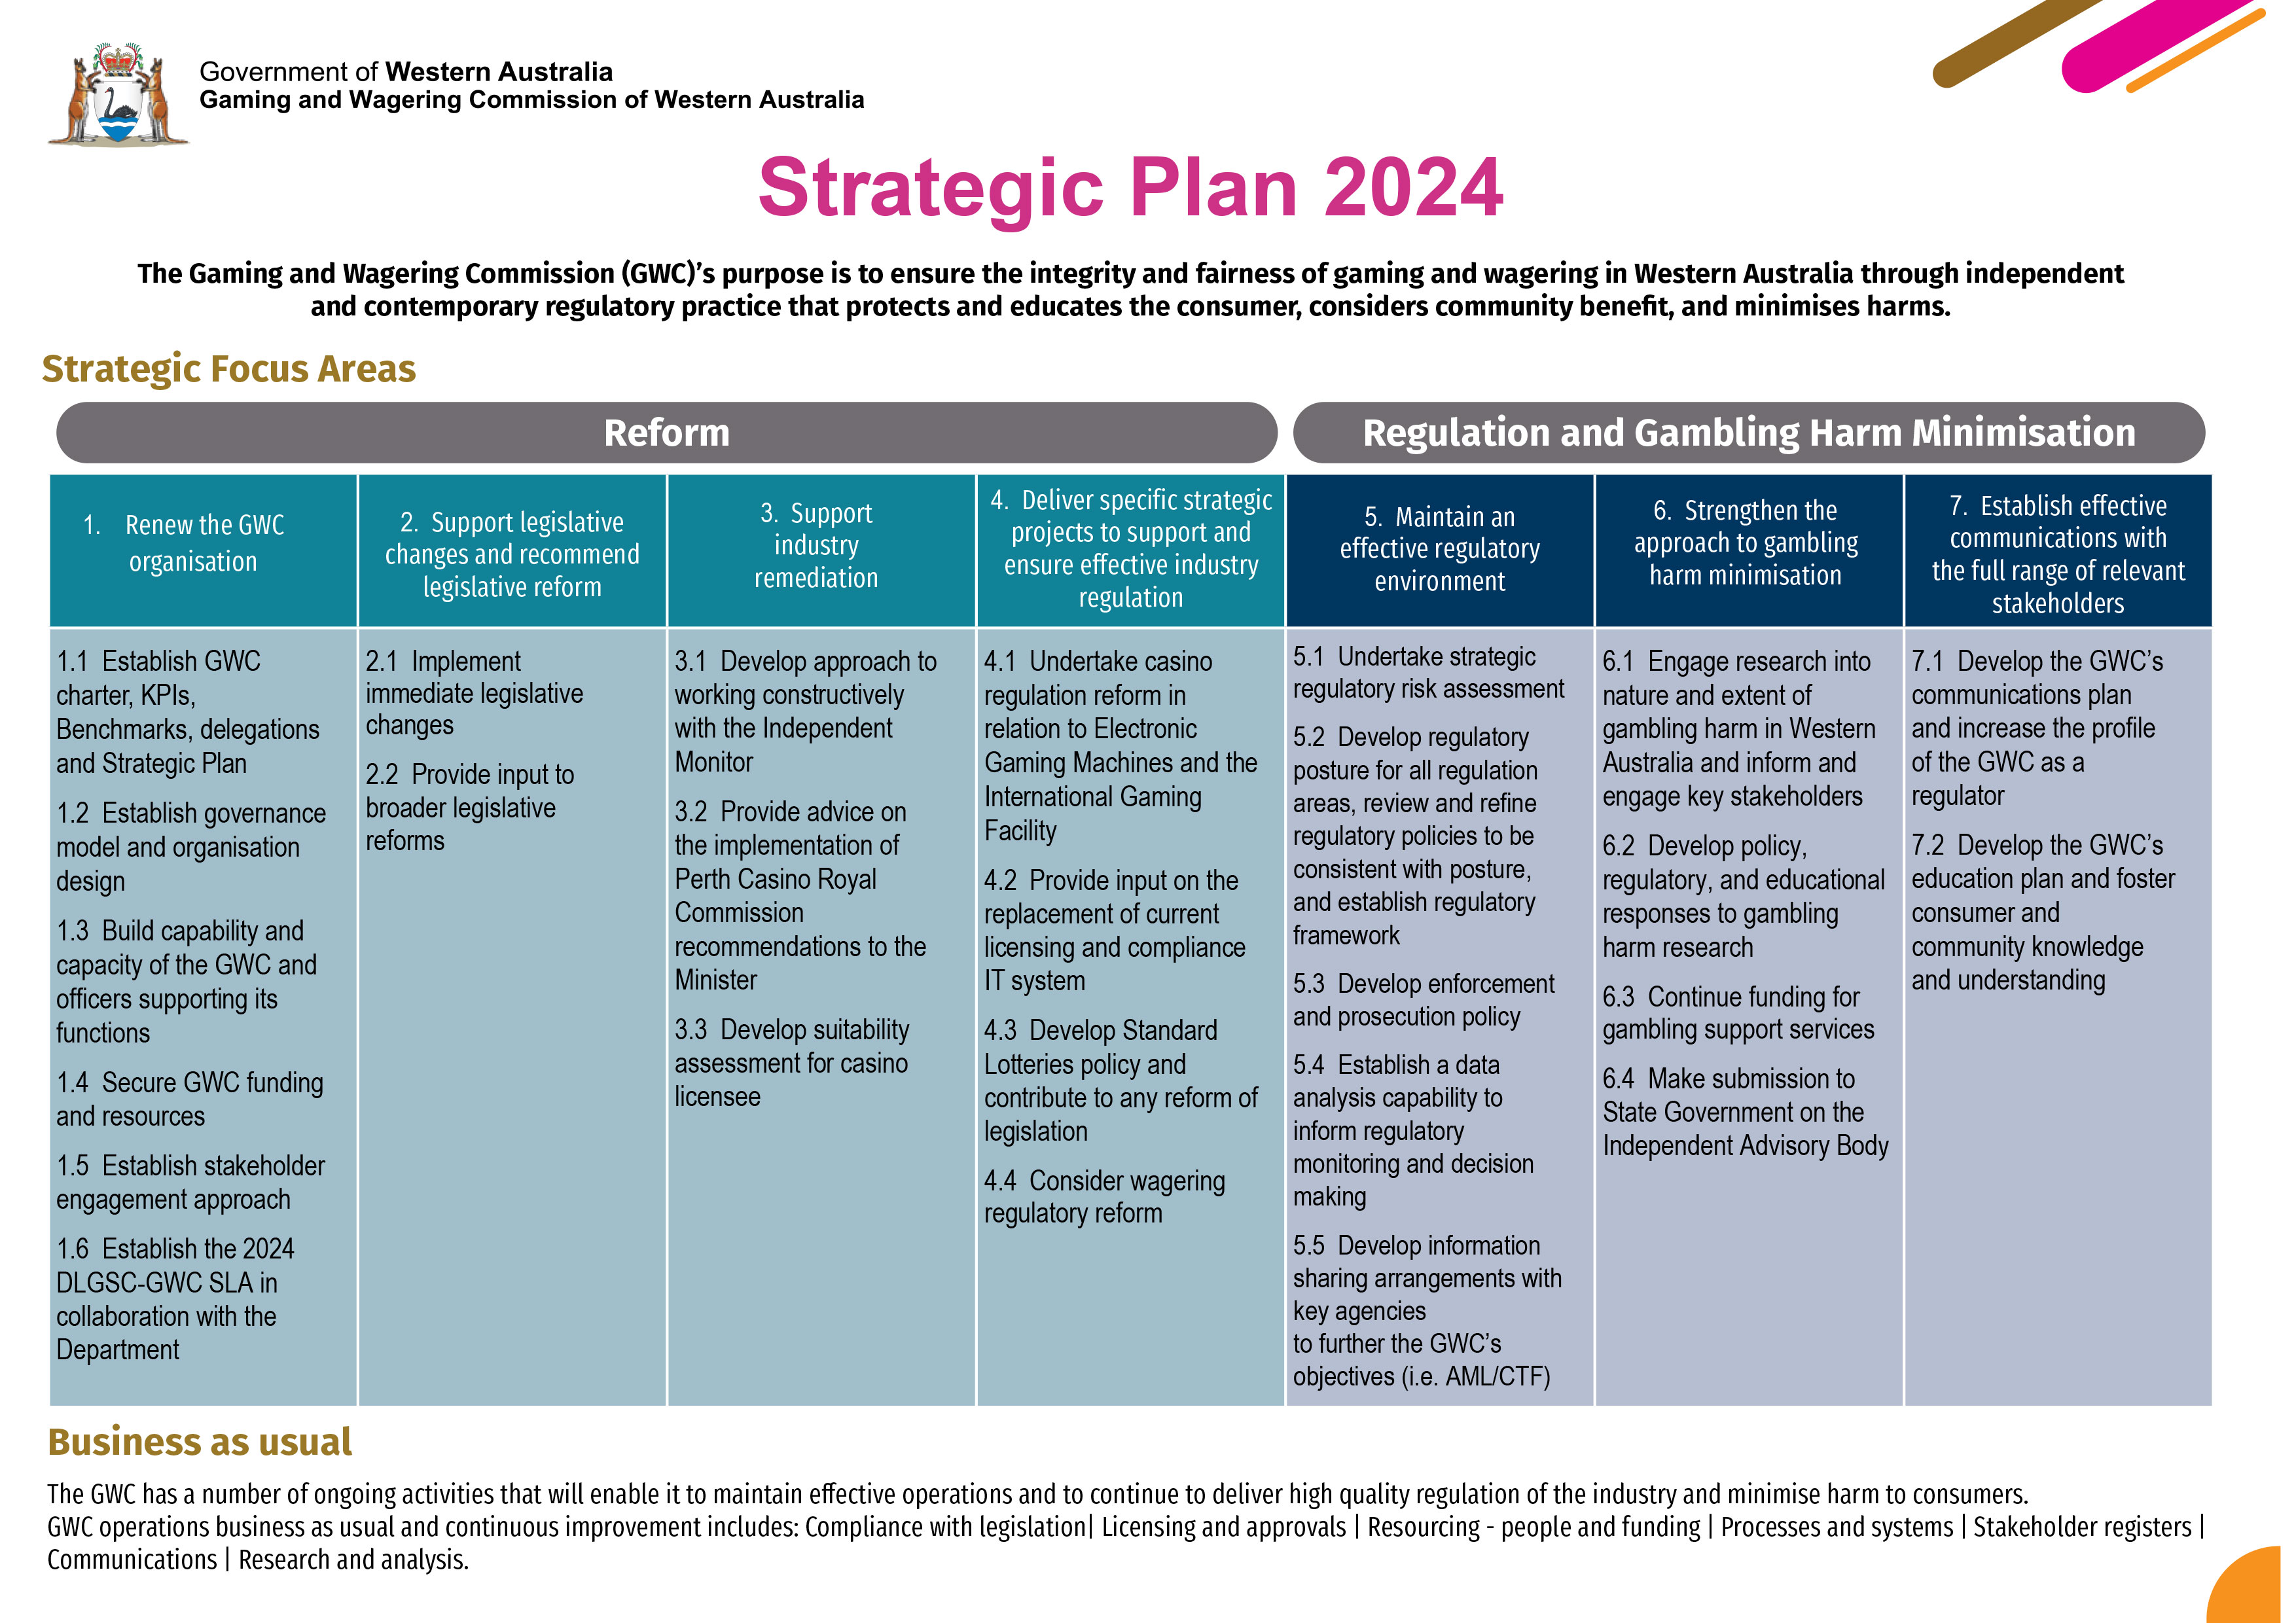 An image of the Strategic plan